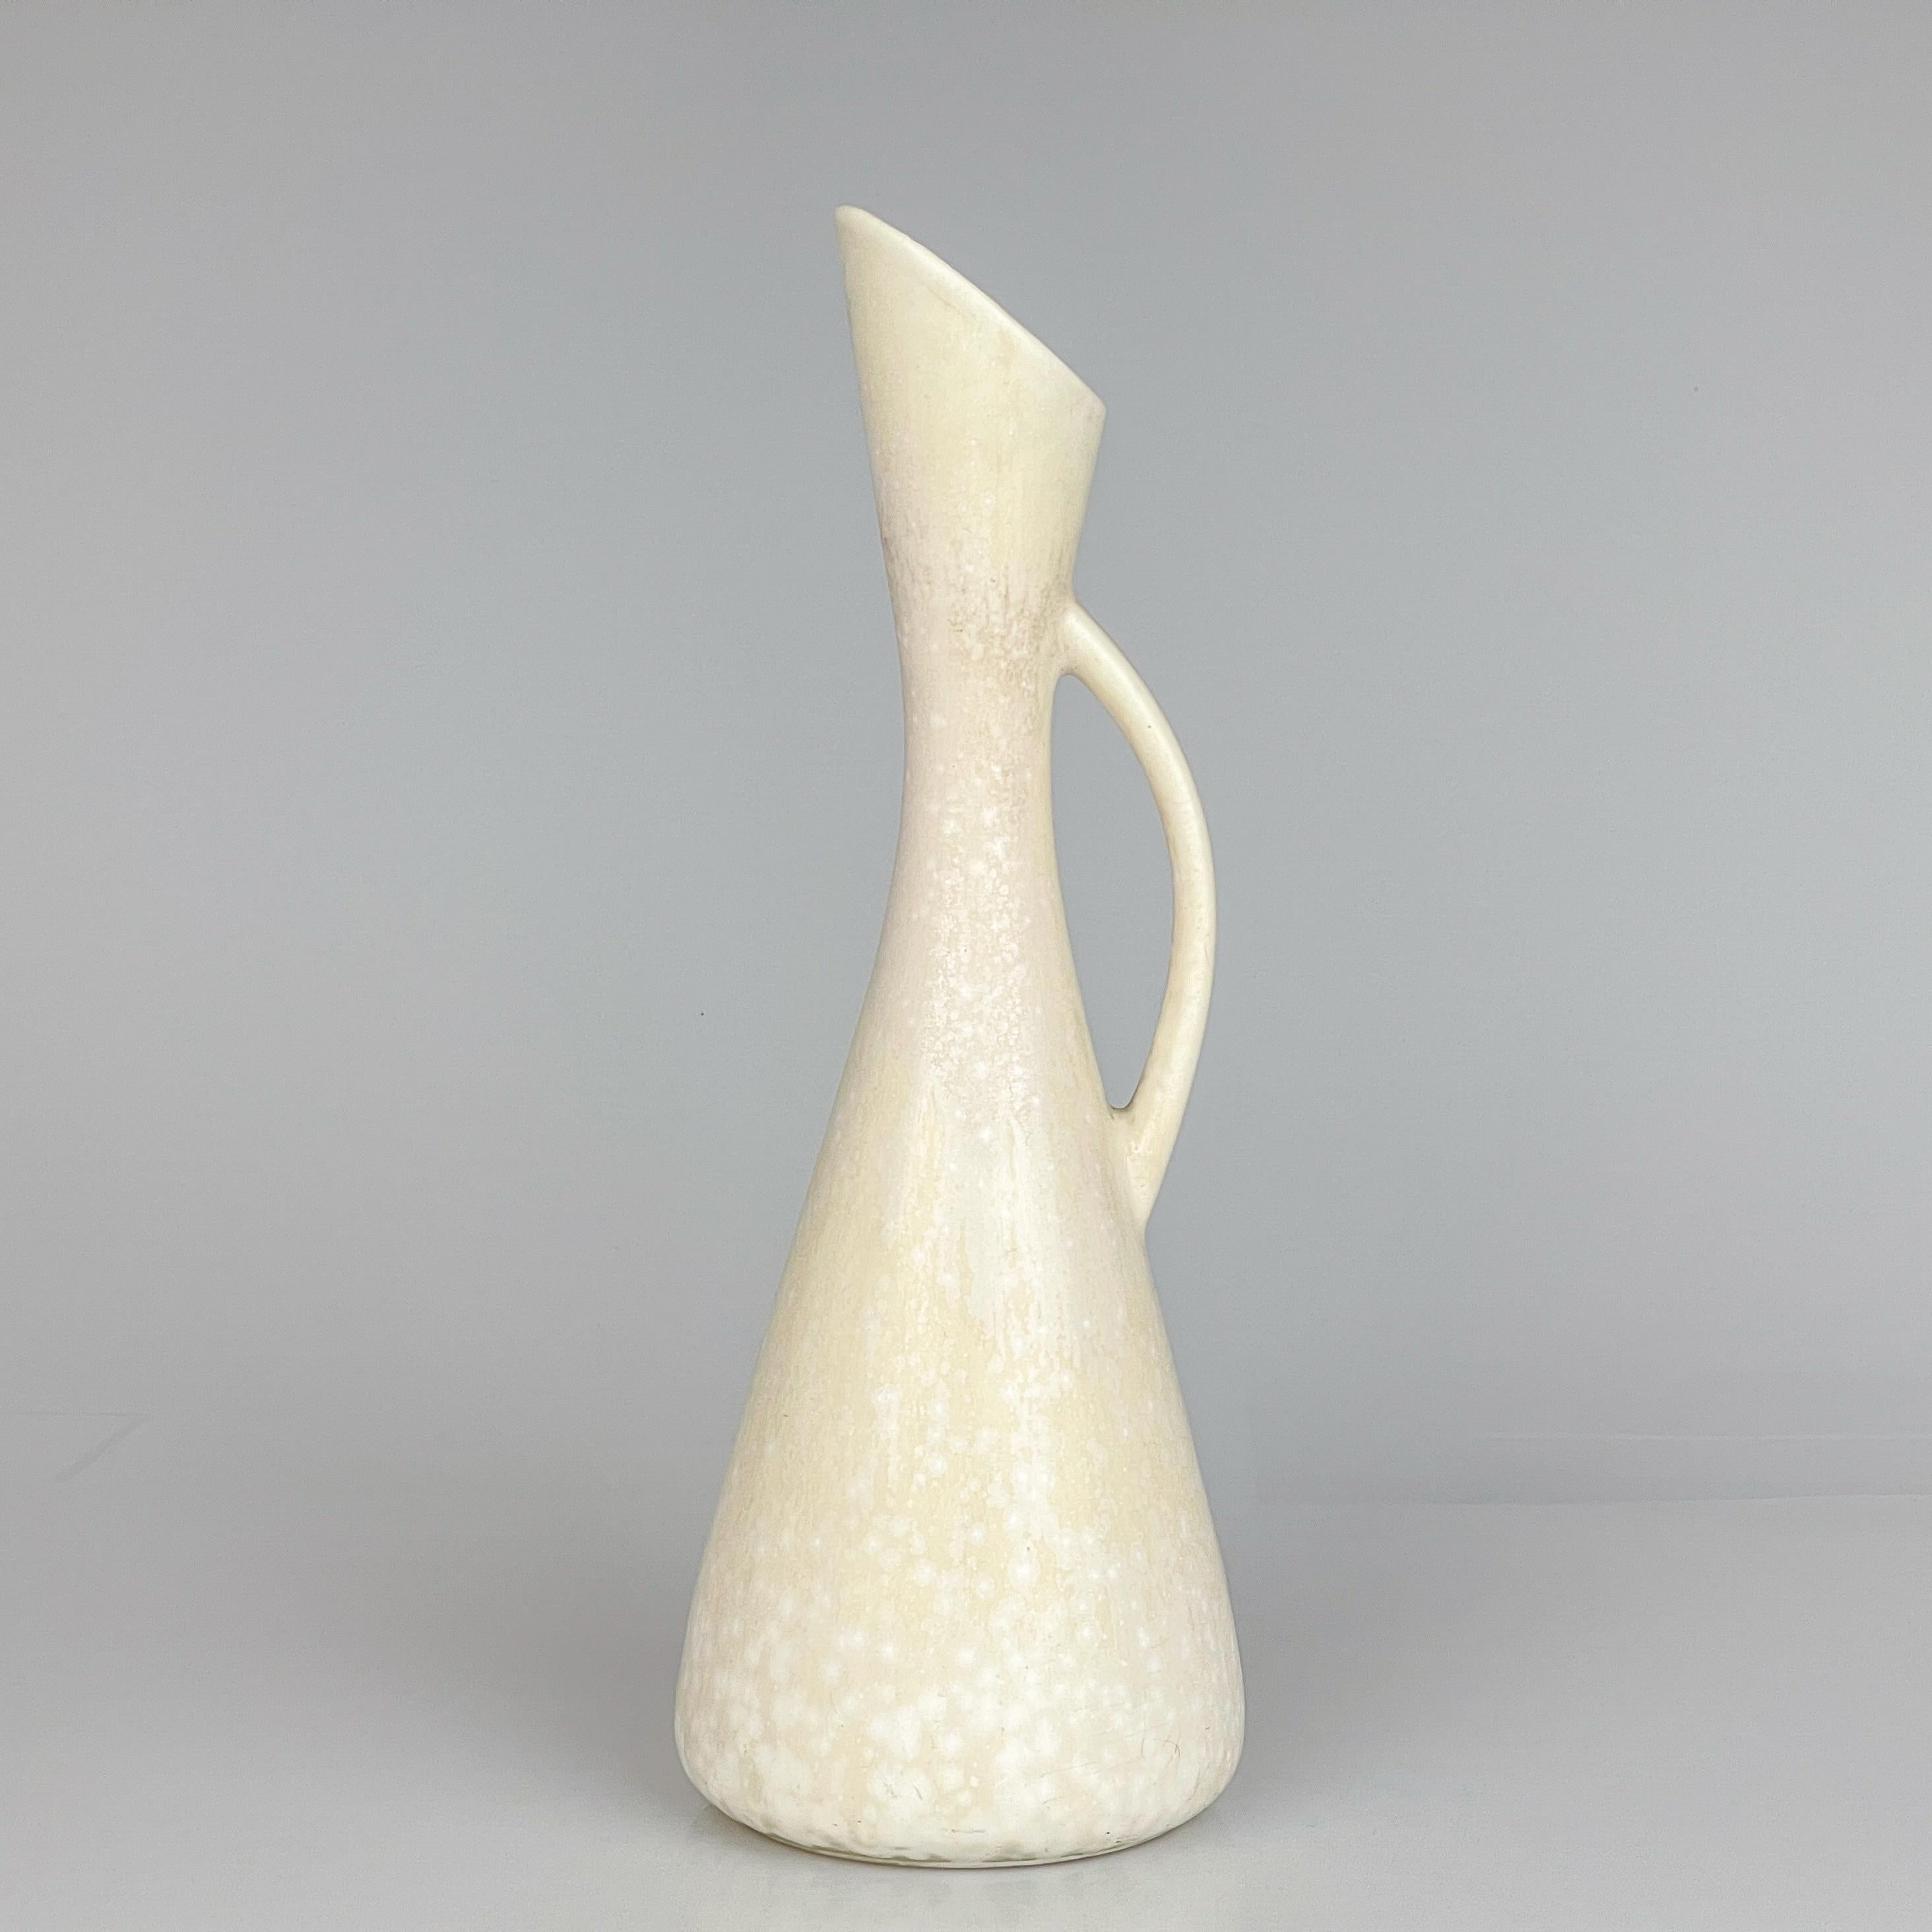 Gunnar Nylund, Stoneware vase /pitcher Rörstrand, Sweden, circa 1950

Description
A stoneware vase / pitcher, model AUD, finished in a beautiful white “eggshell” glaze.

This object was designed by Gunnar Nylund and executed by the Swedish ceramics